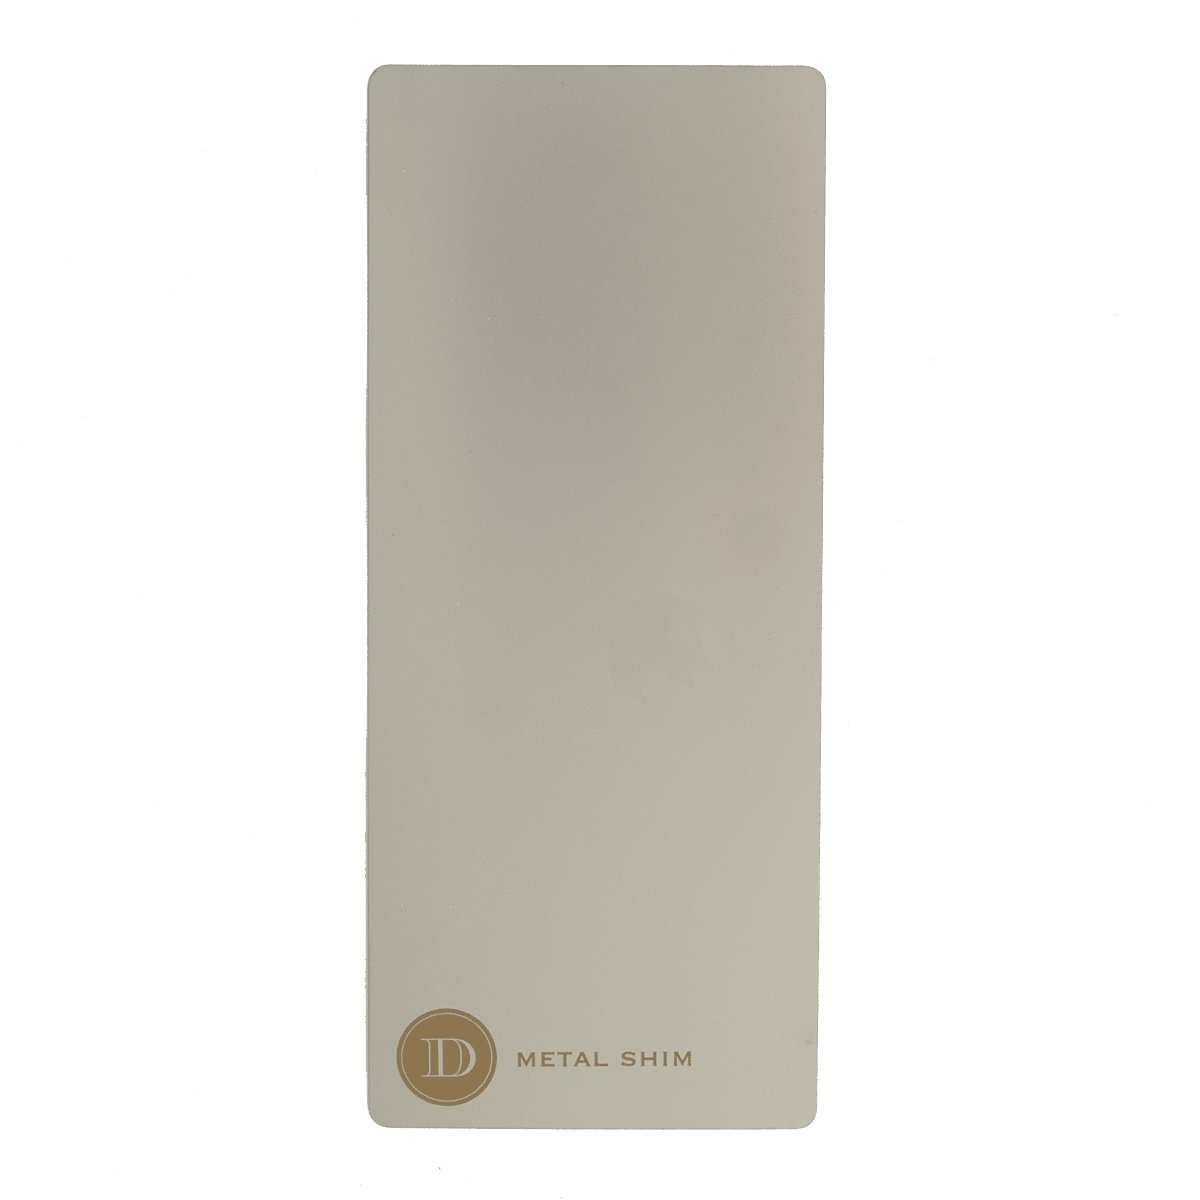 a white card with a gold logo on it.